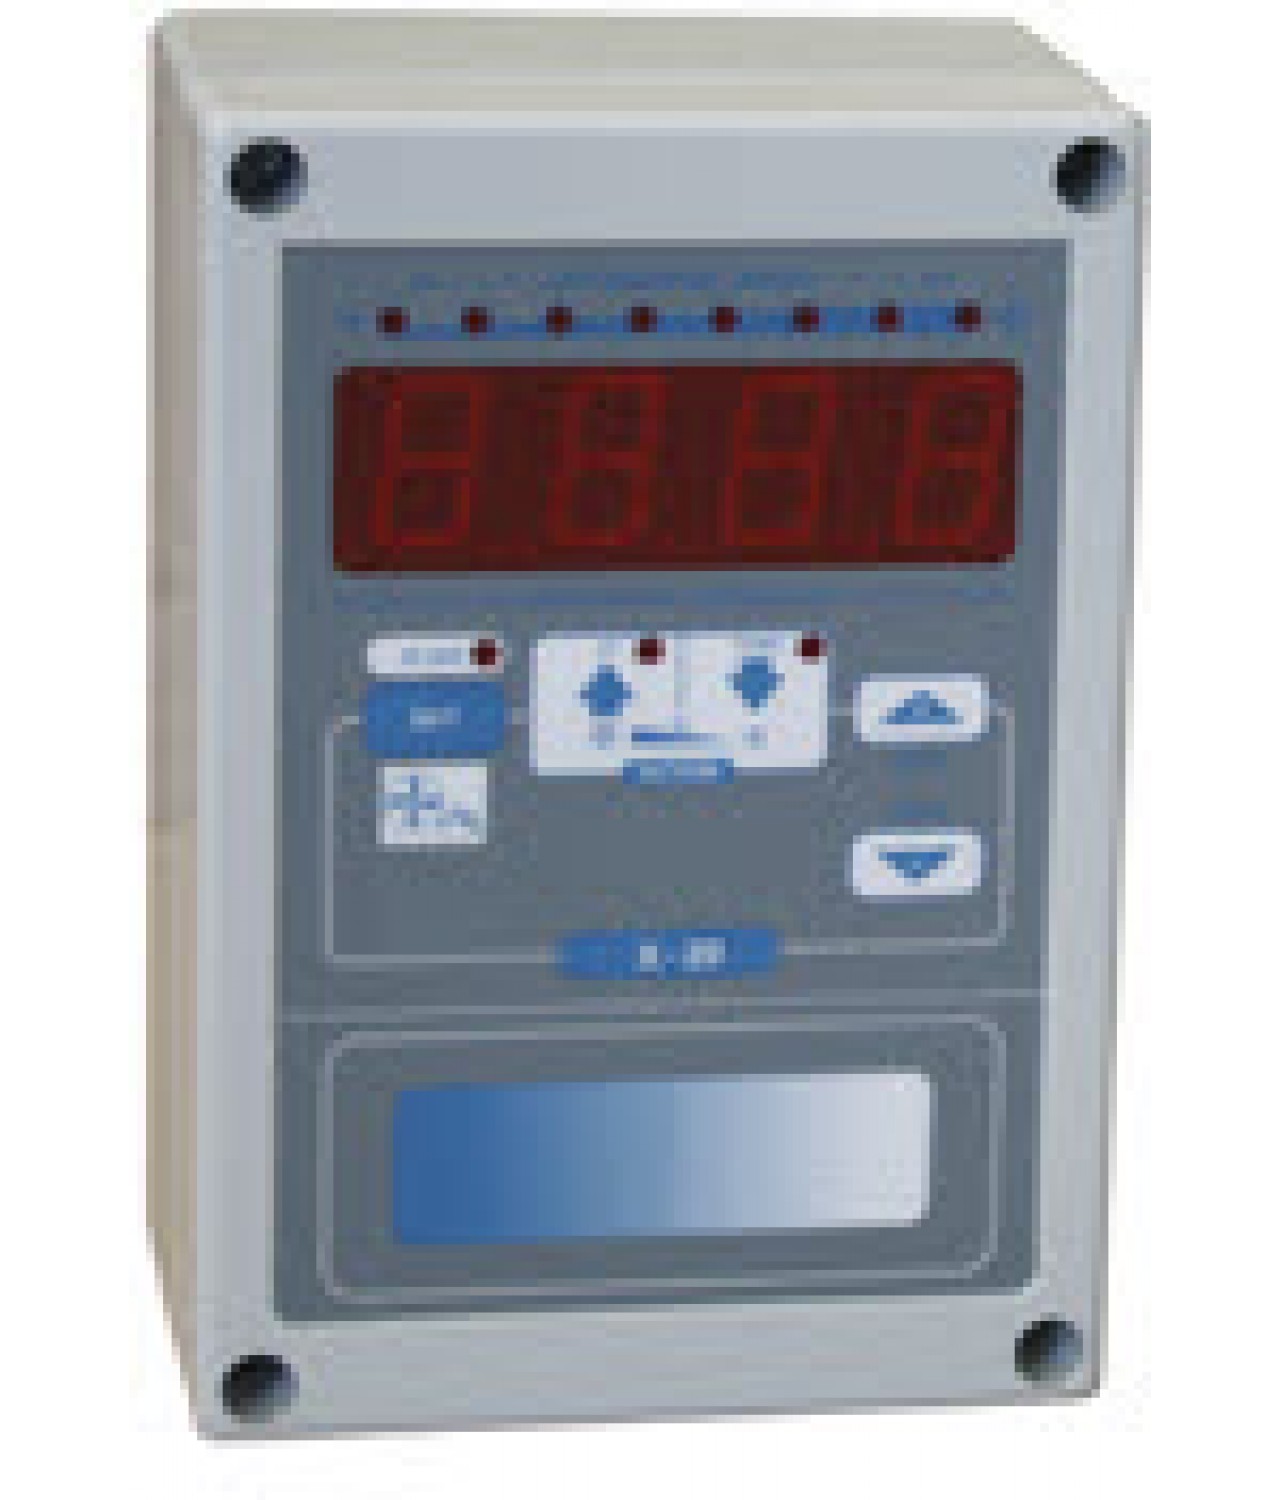 Control panel X20 - speed controller for SUPER POLAR HVLS ceiling fans - to be ordered separately